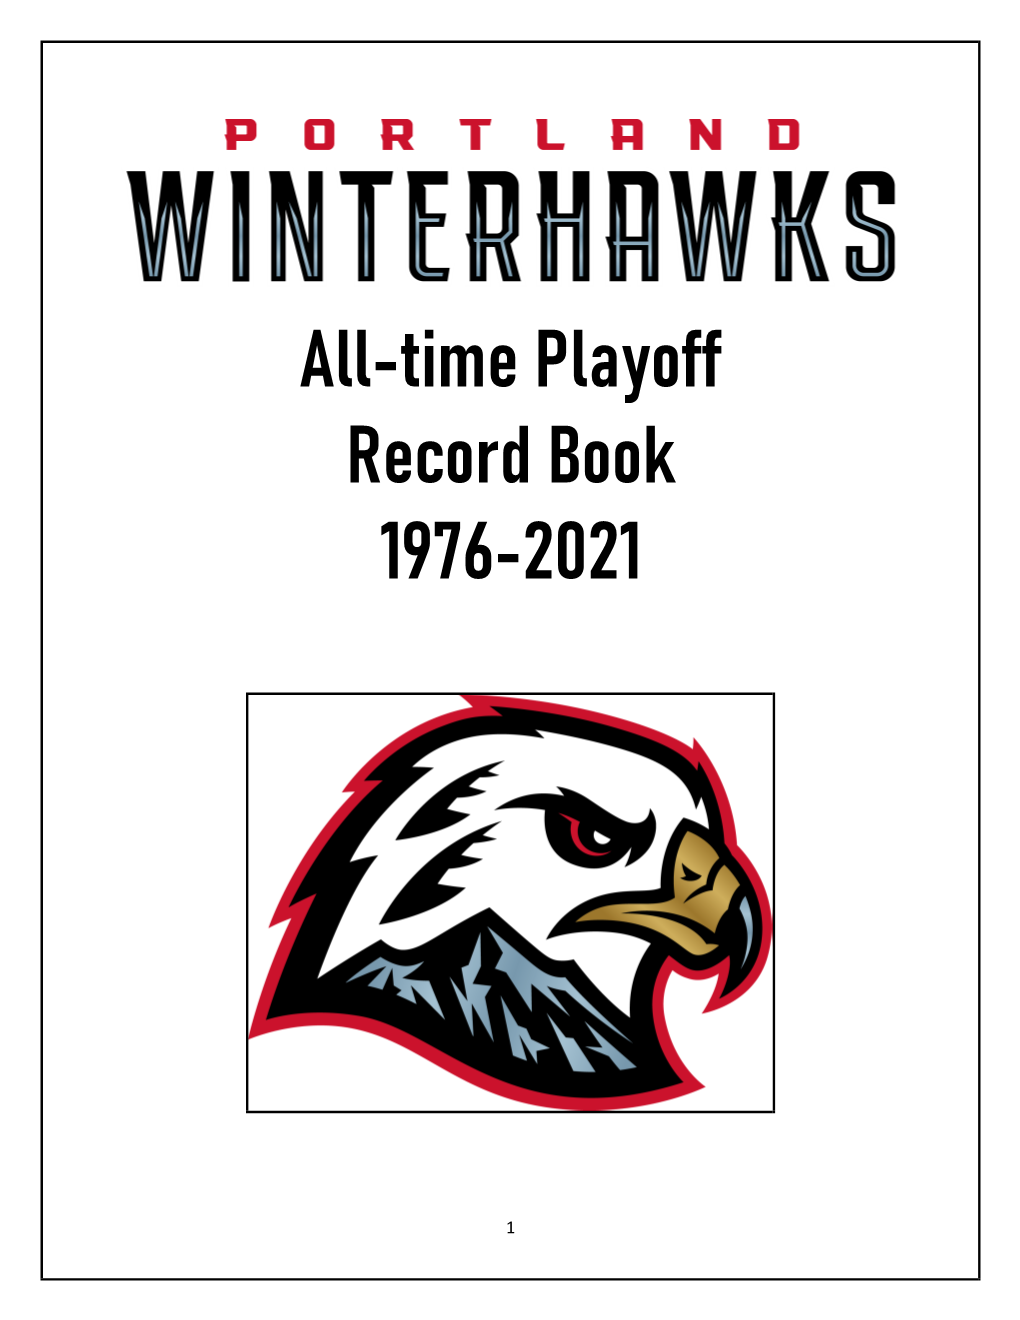 2020-21 Playoff Record Book